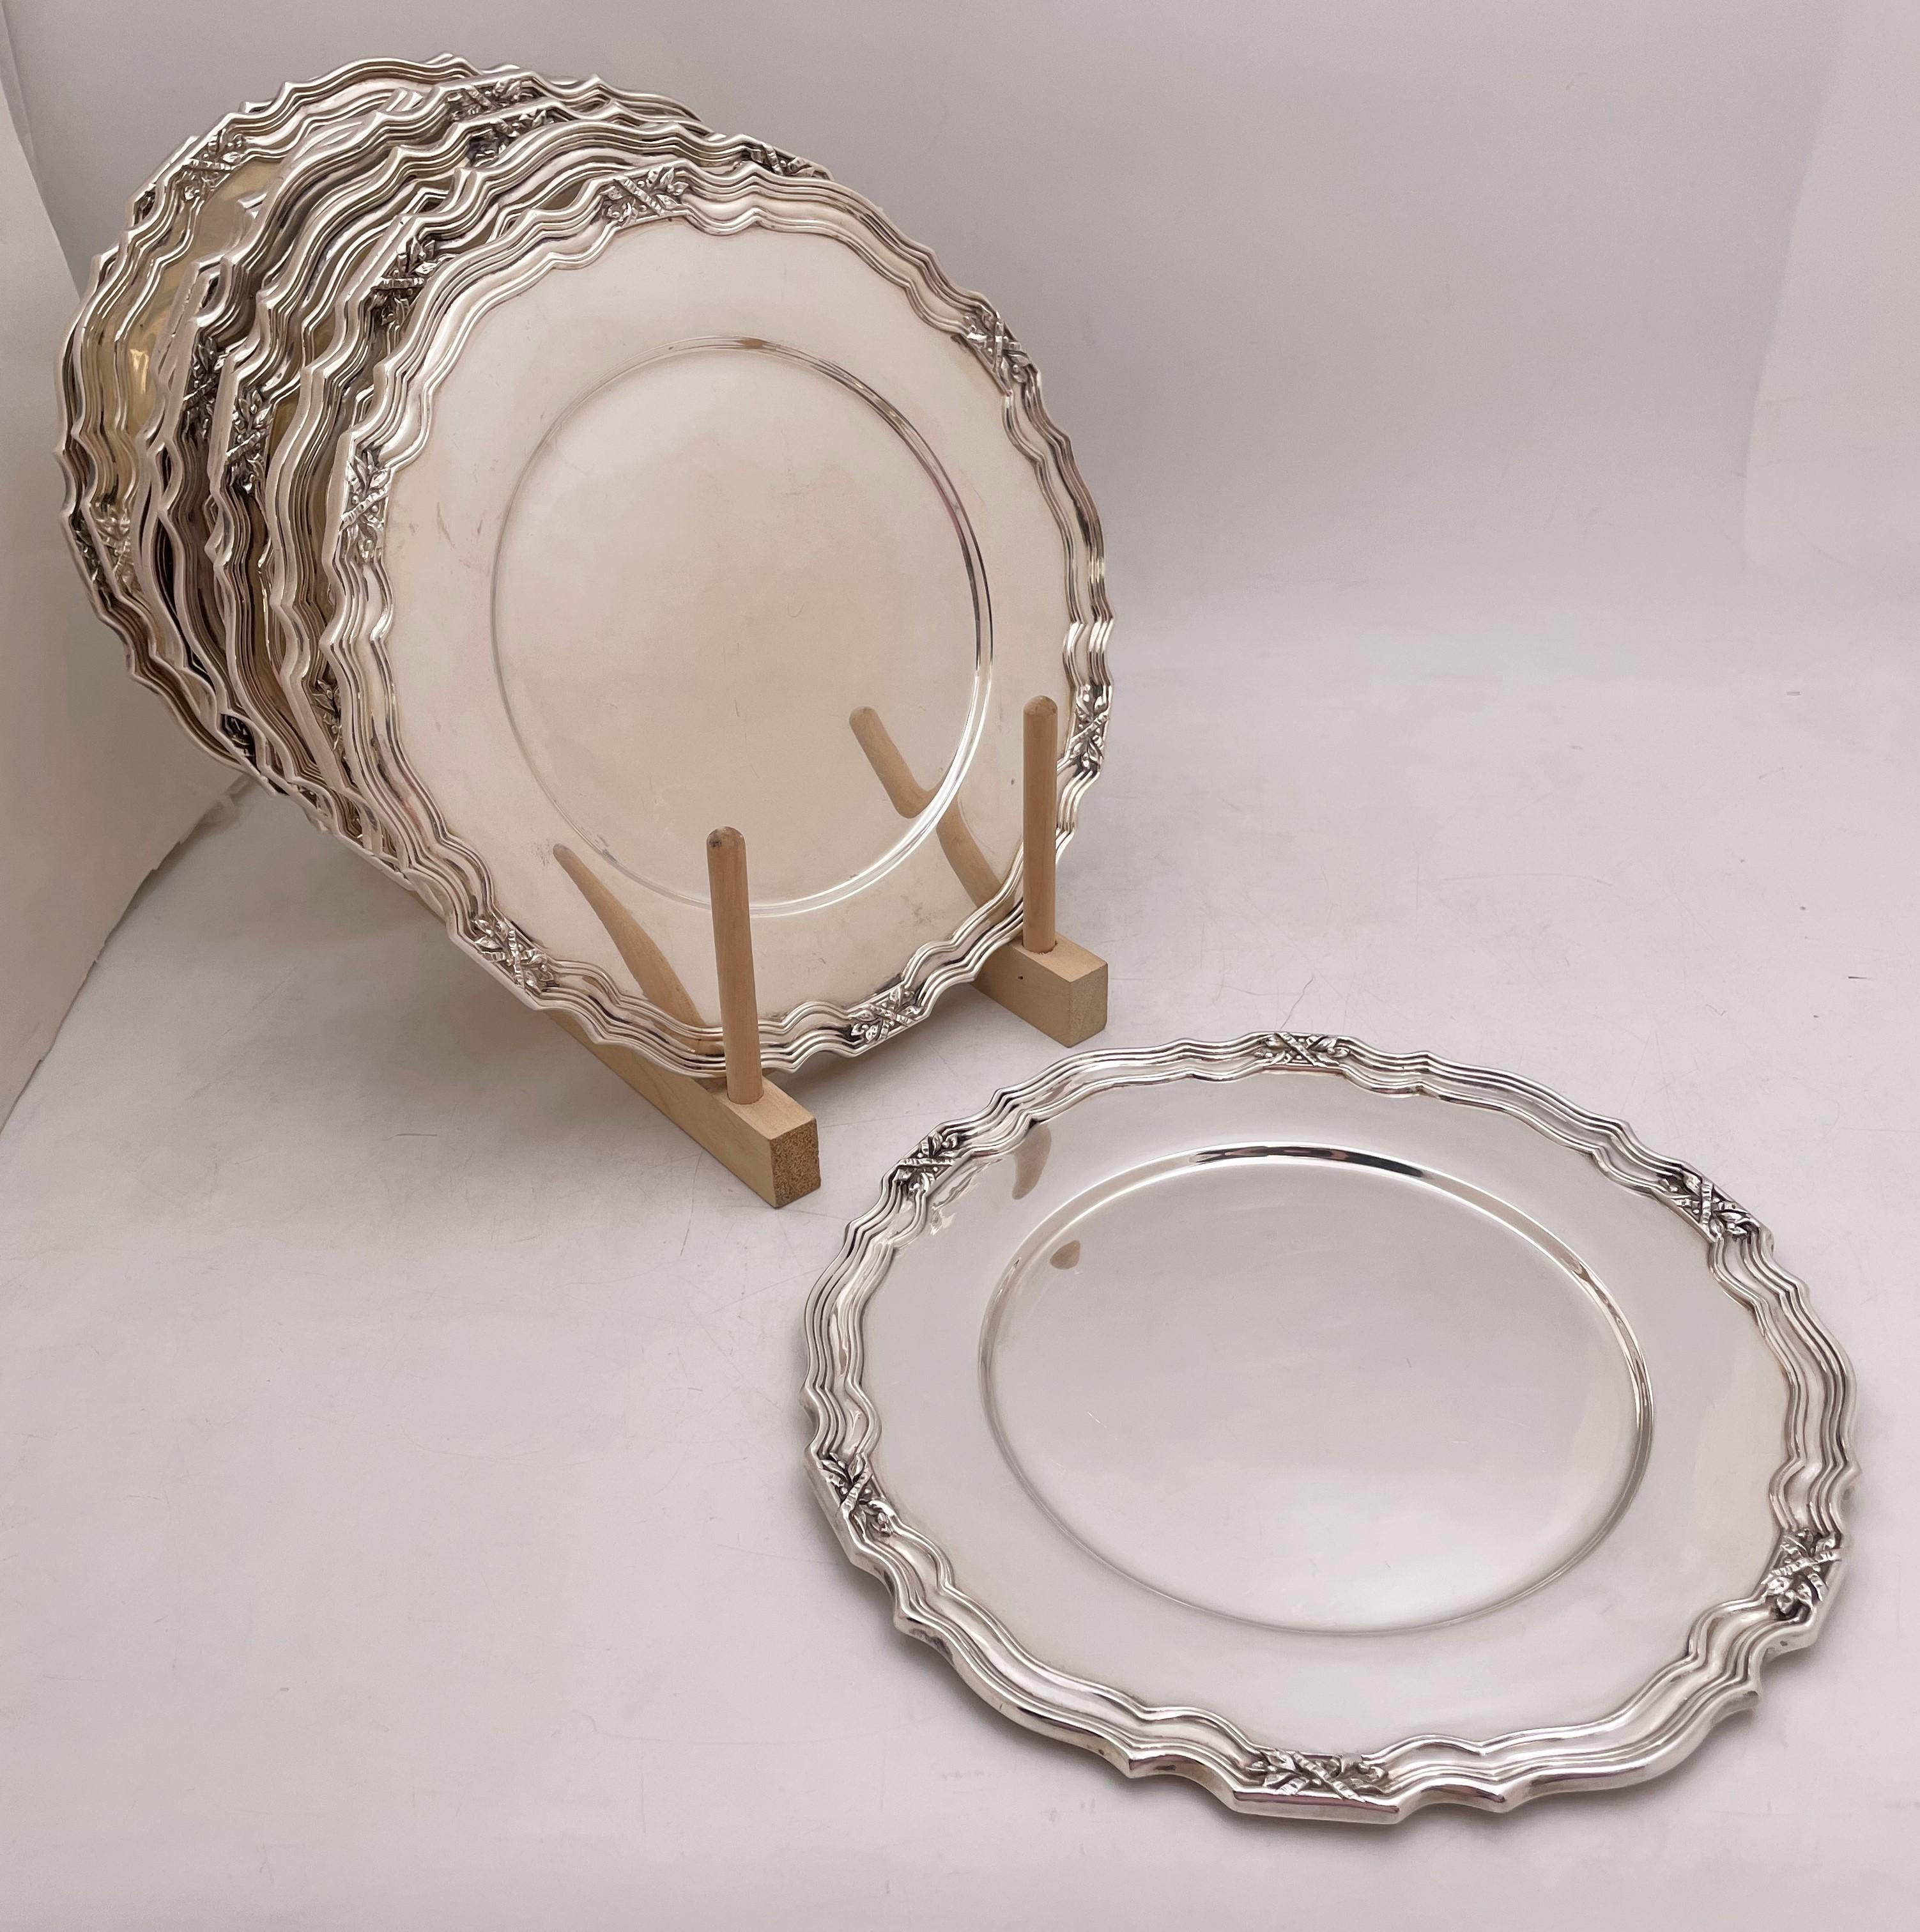 Dominick & Haff set of 12 sterling silver multilobed dinner plates or chargers from 1907, with floral motifs and curvilinear designs adorning the rim, with a heavy gage. Each measures almost 11'' in diameter by 3/4'' in height and bears hallmarks as